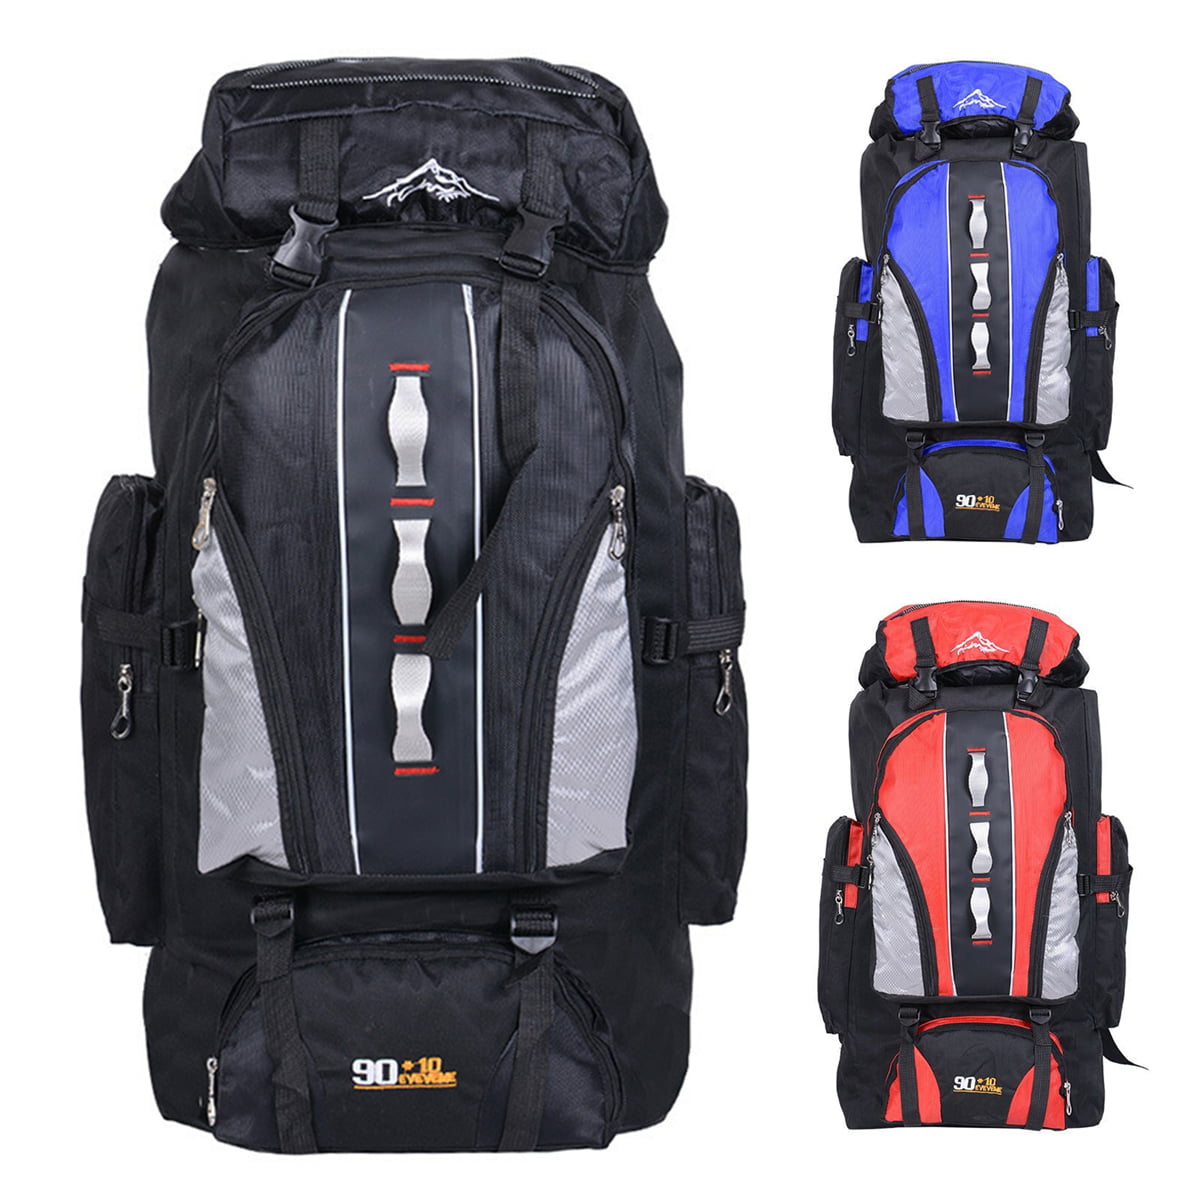 Details about   Waterproof Outdoor Tactical Nylon Backpack Hiking Travel Rucksack Bag Durable 